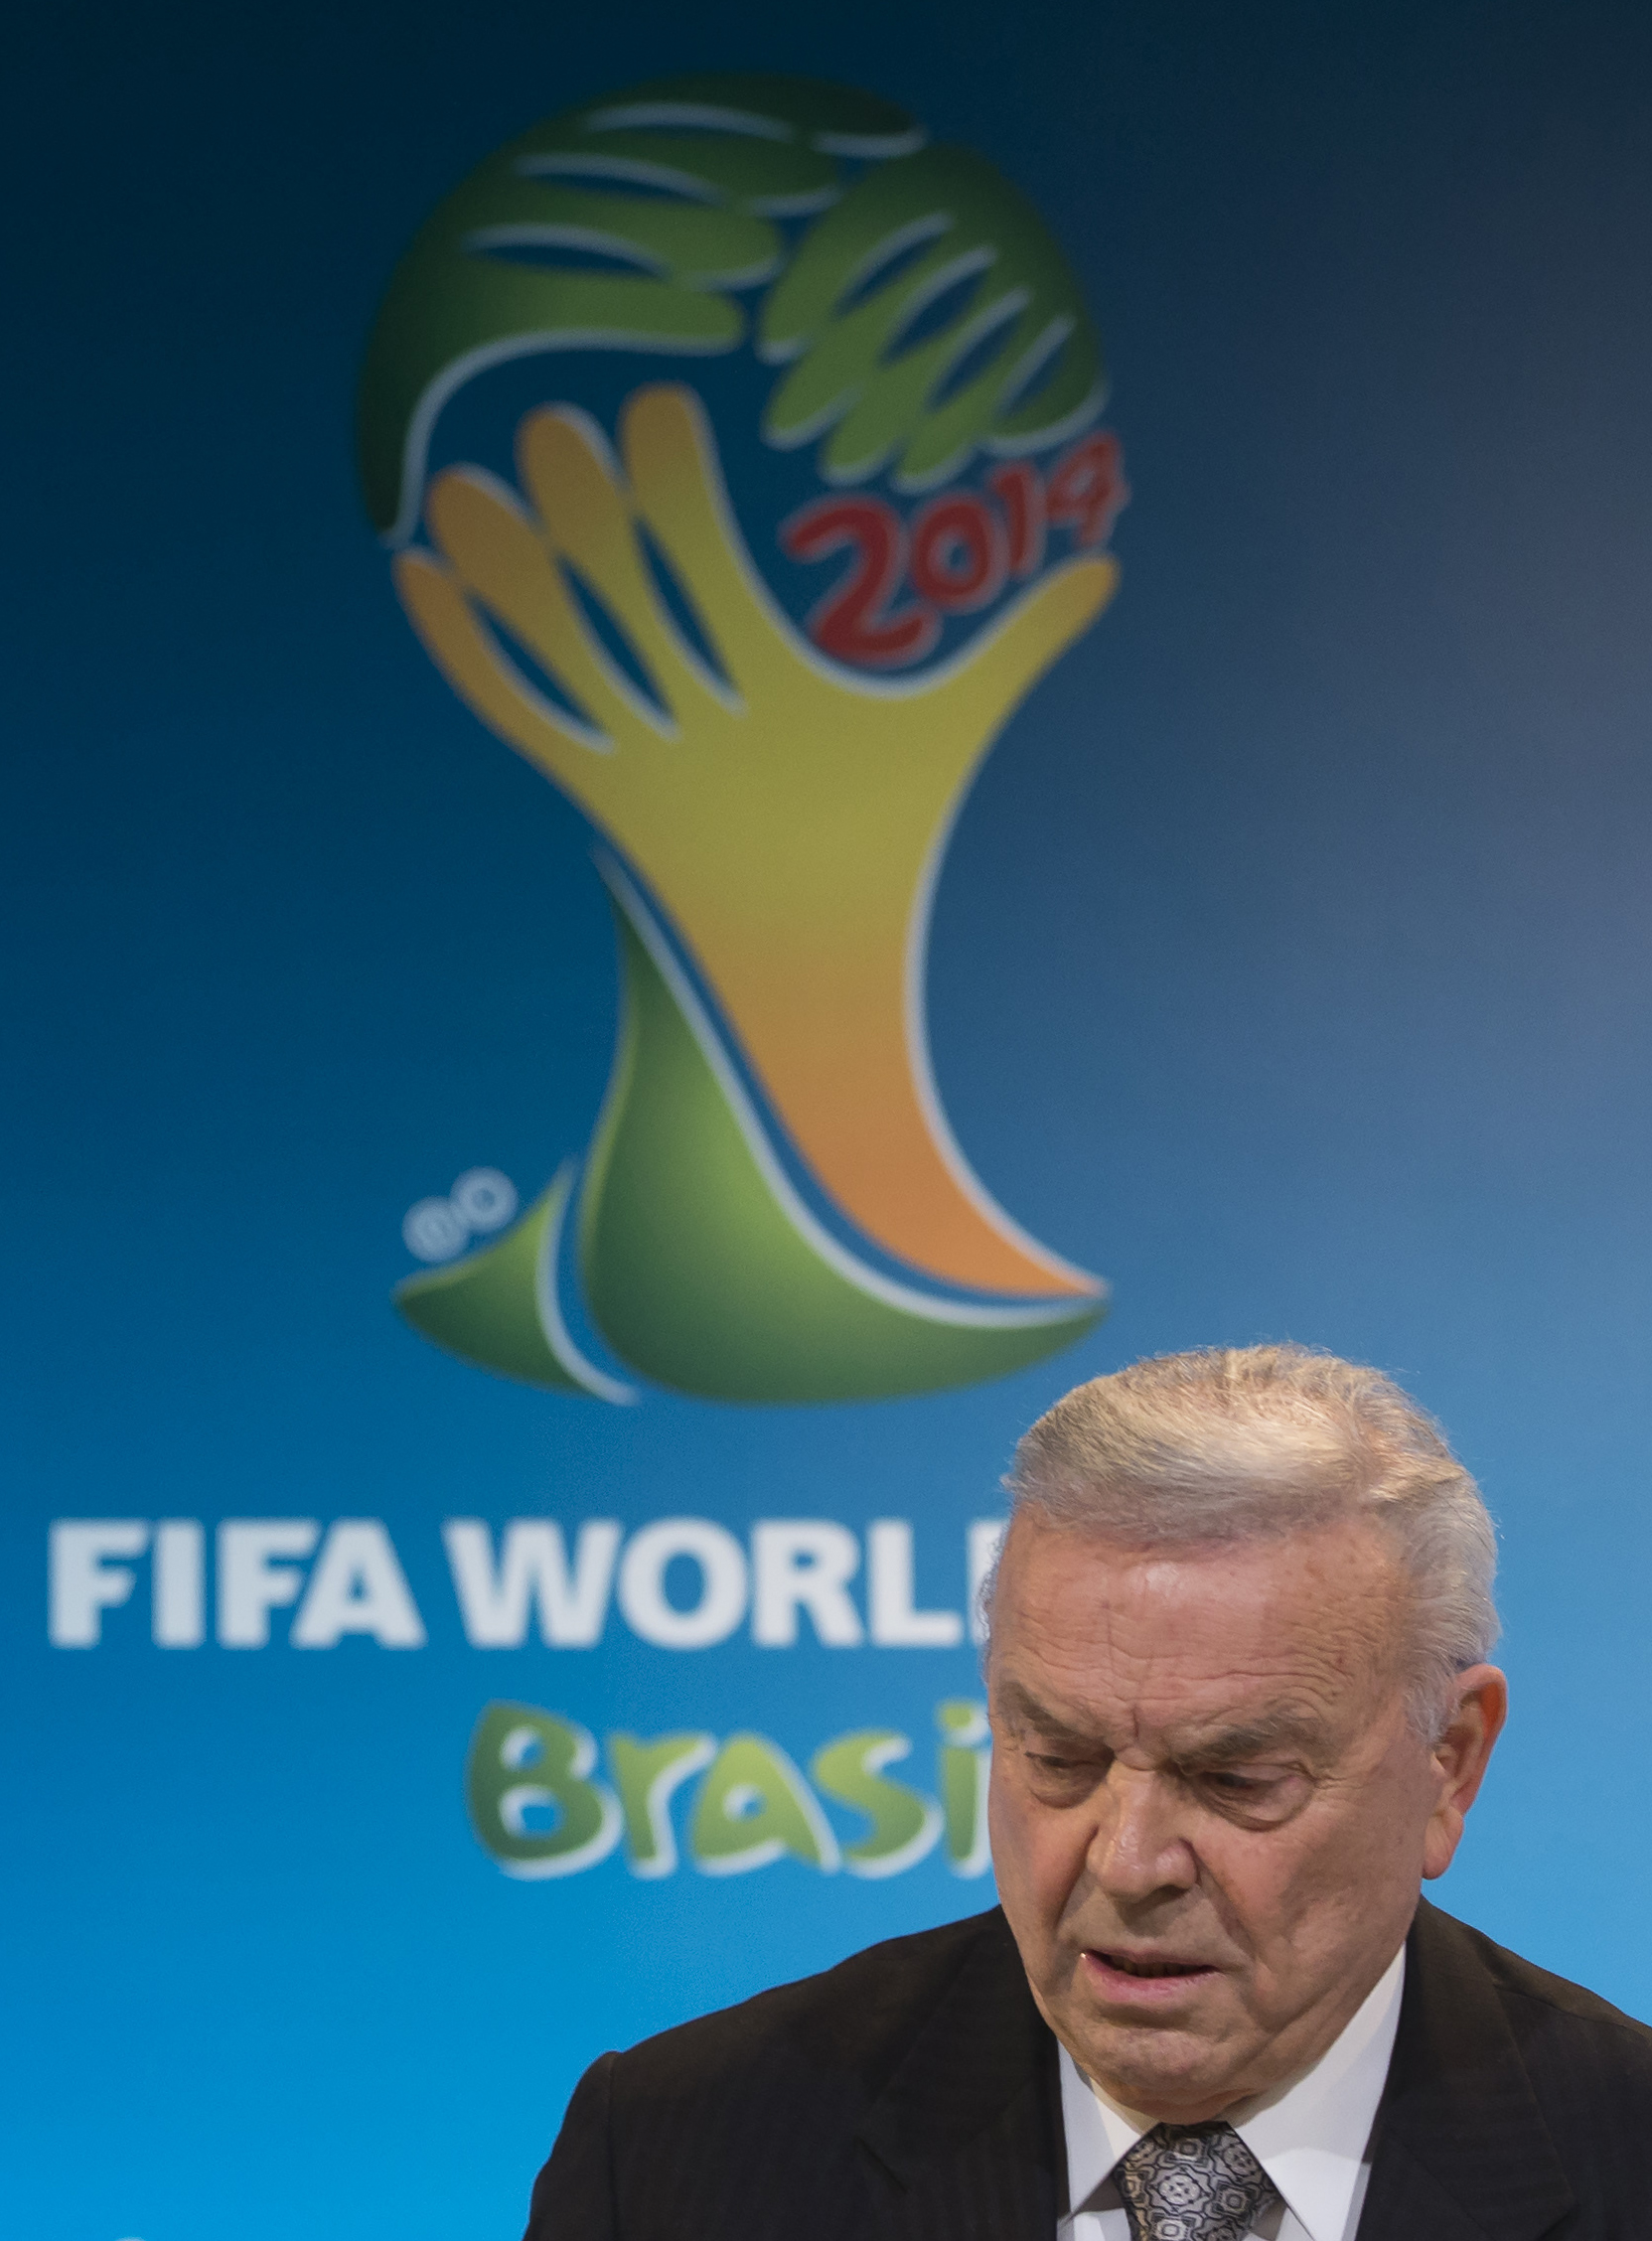 PHOTO: LOC chairman Jose Maria Marin attends a press conference following the meeting of the Organizing Committee for the FIFA World Cup 2014 in Costa do Sauipe, Brazil on March 27, 2014.